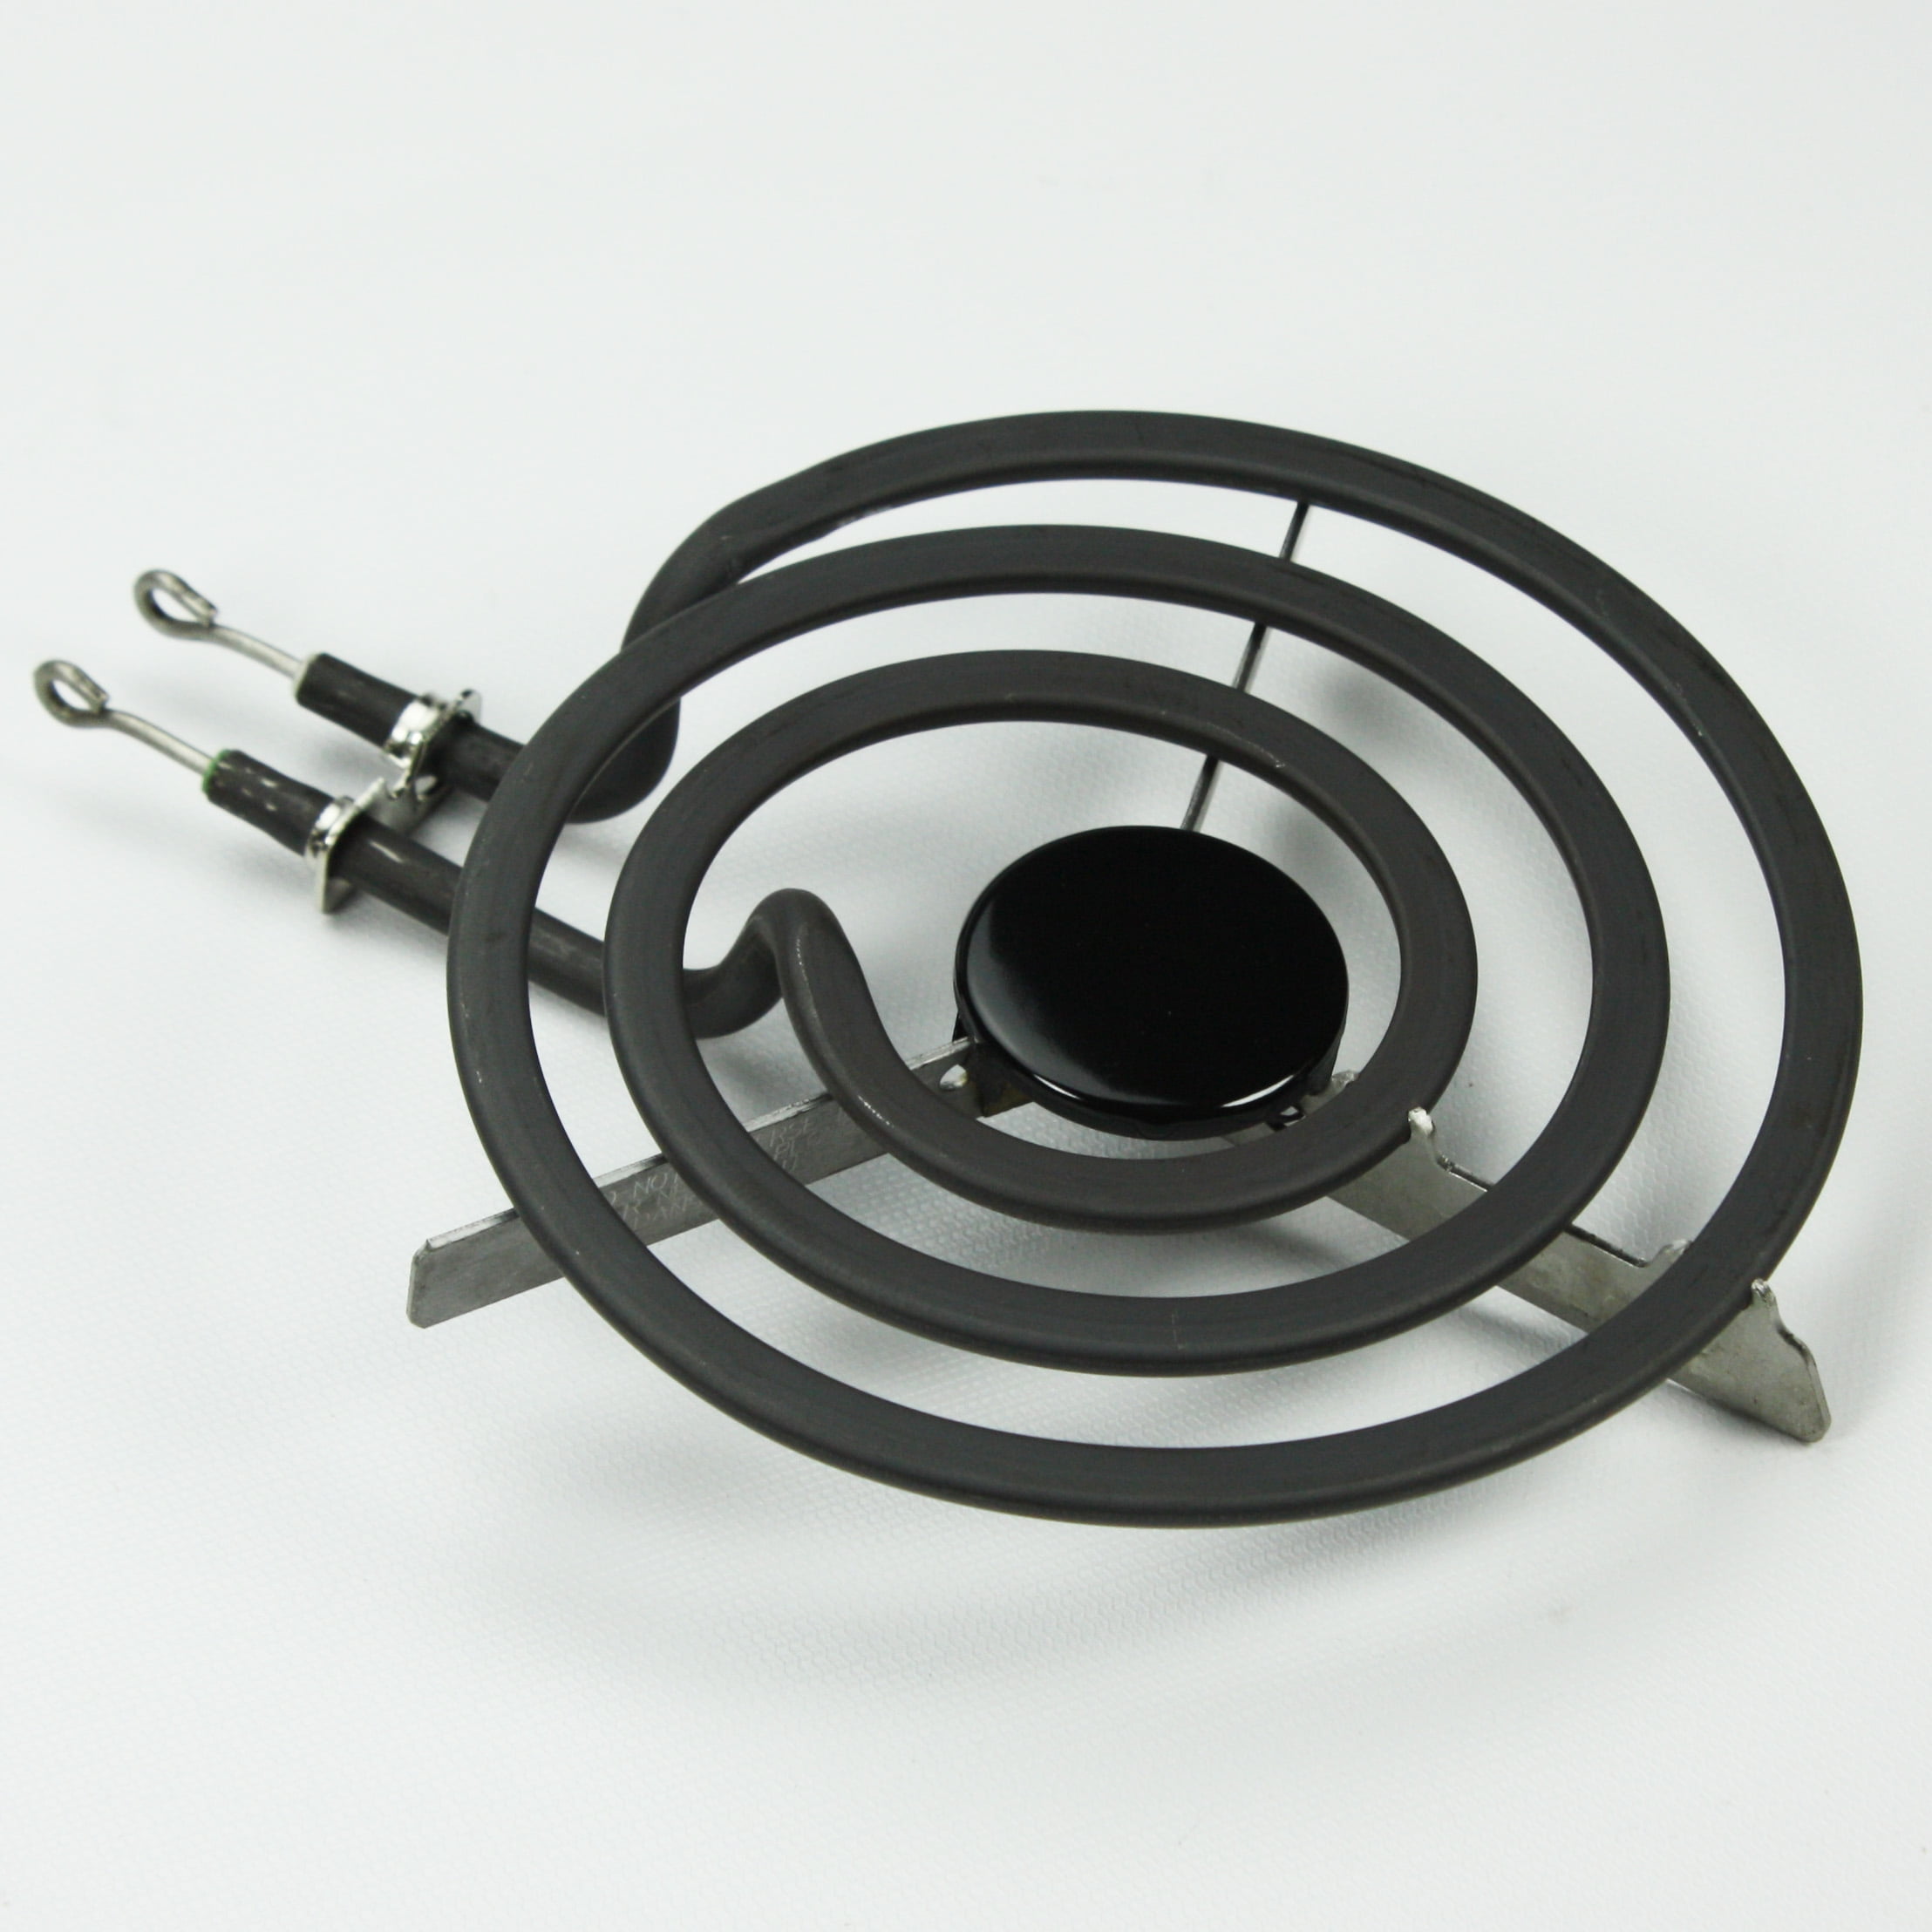 FITS UNIVERSAL FAN OVEN COOKER HEATING ELEMENT 3 TURN 2200W 